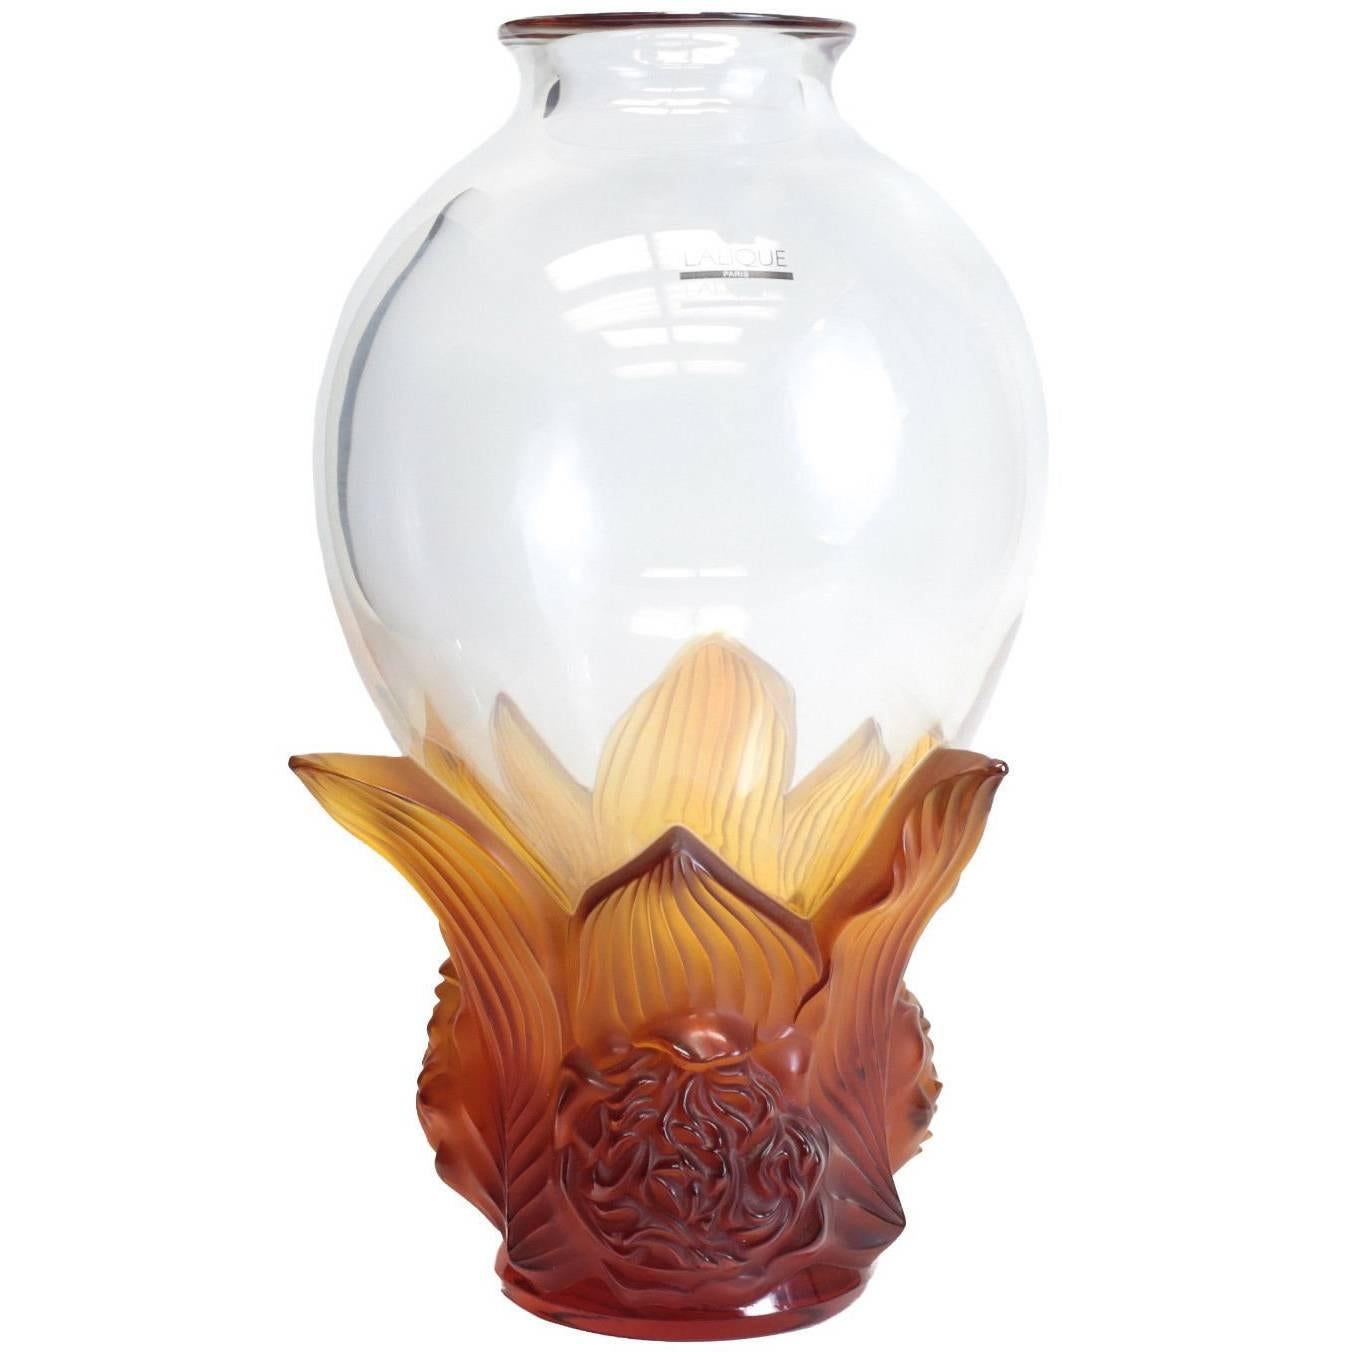 Lovely Lalique France Crystal Clear and Amber Pivoines Peonies Vase, Ltd of 99 For Sale